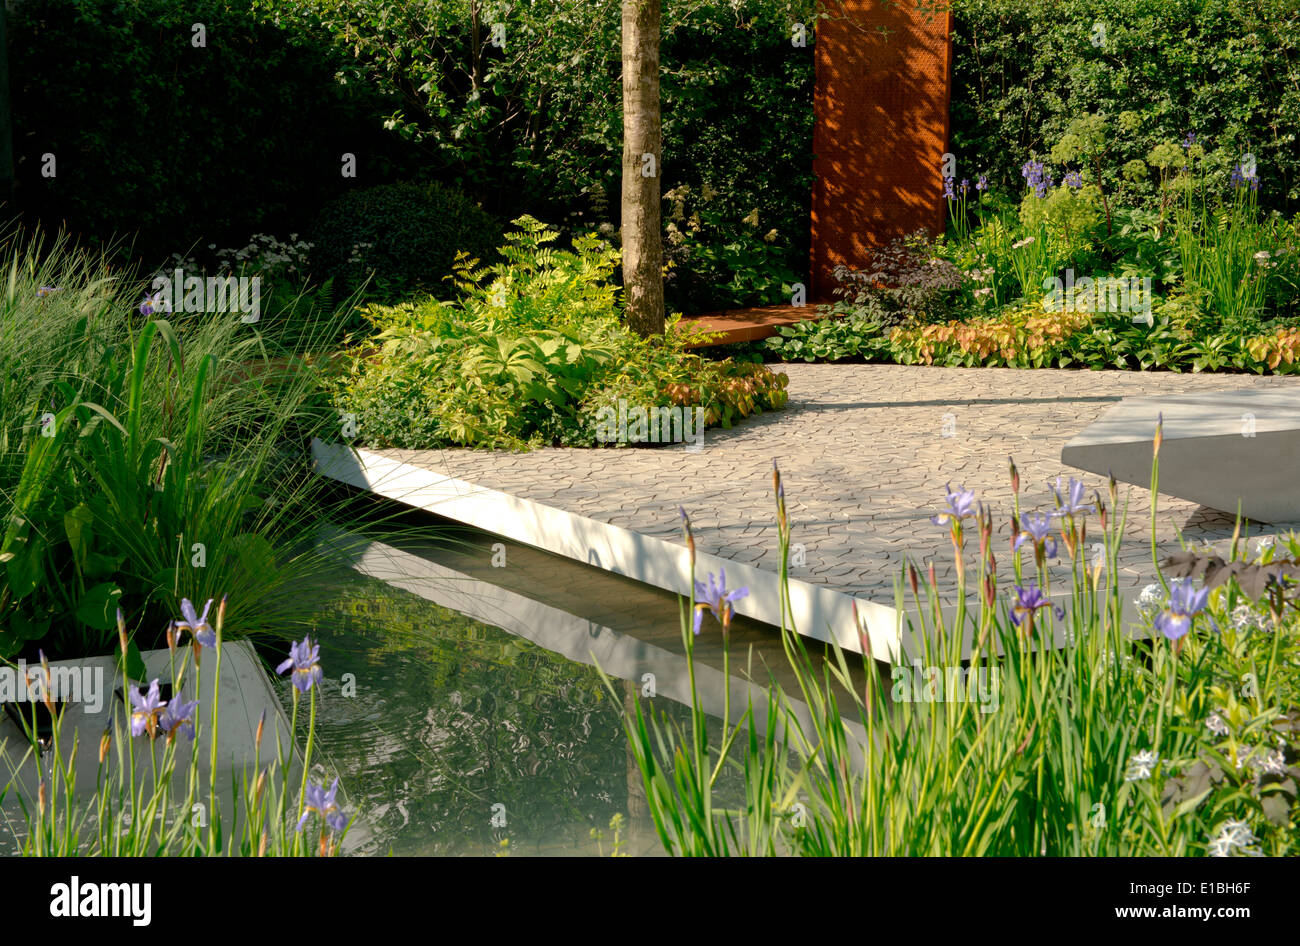 The RBC Waterscape Garden a show garden gold medal winner at the Chelsea Flower Show 2014, designed by Hugo Bugg Stock Photo